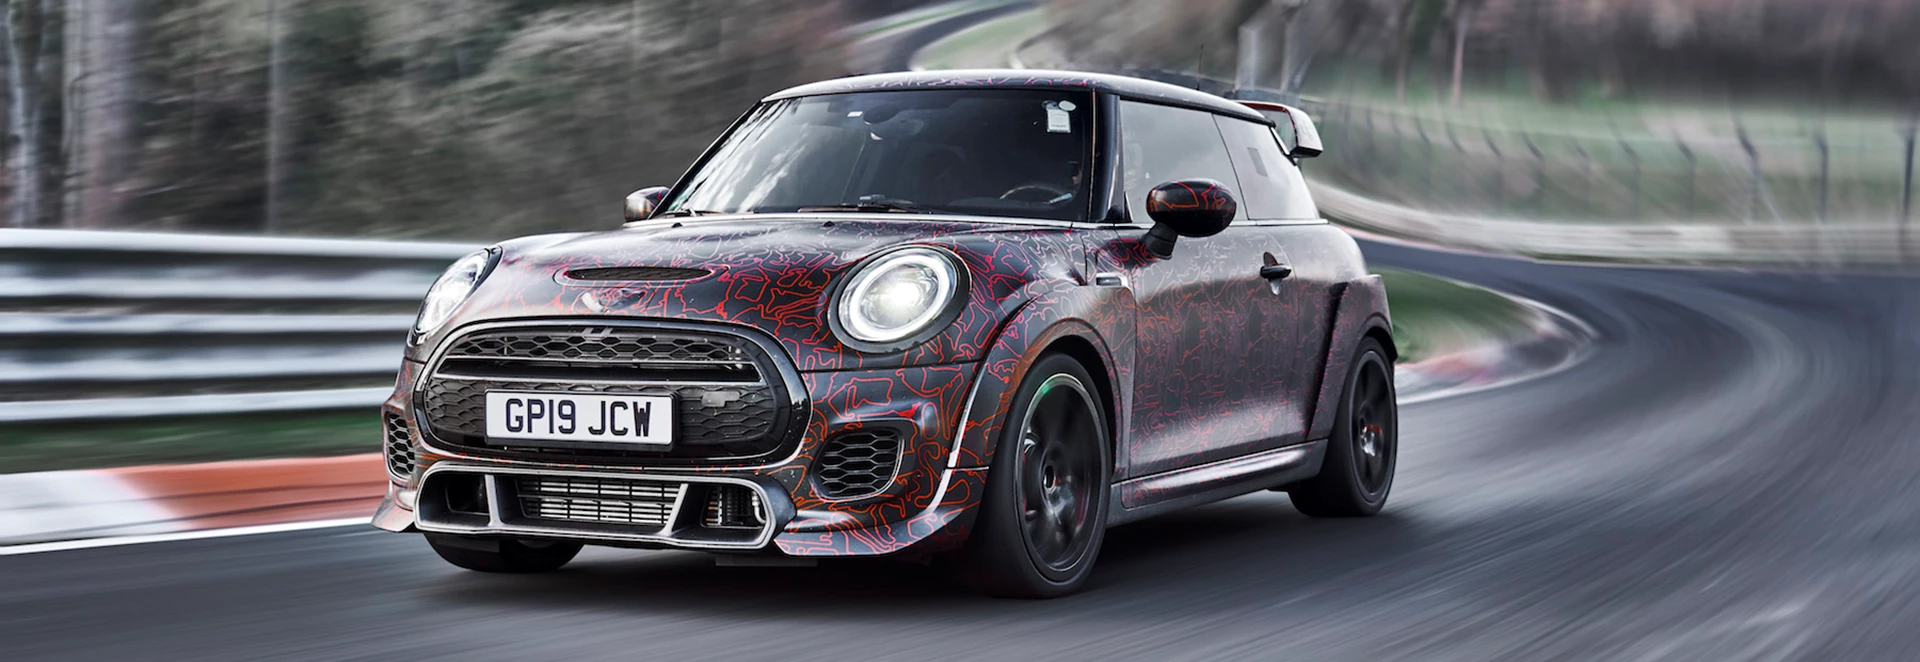 Mini reveals first official images of its John Cooper Works GP prototype